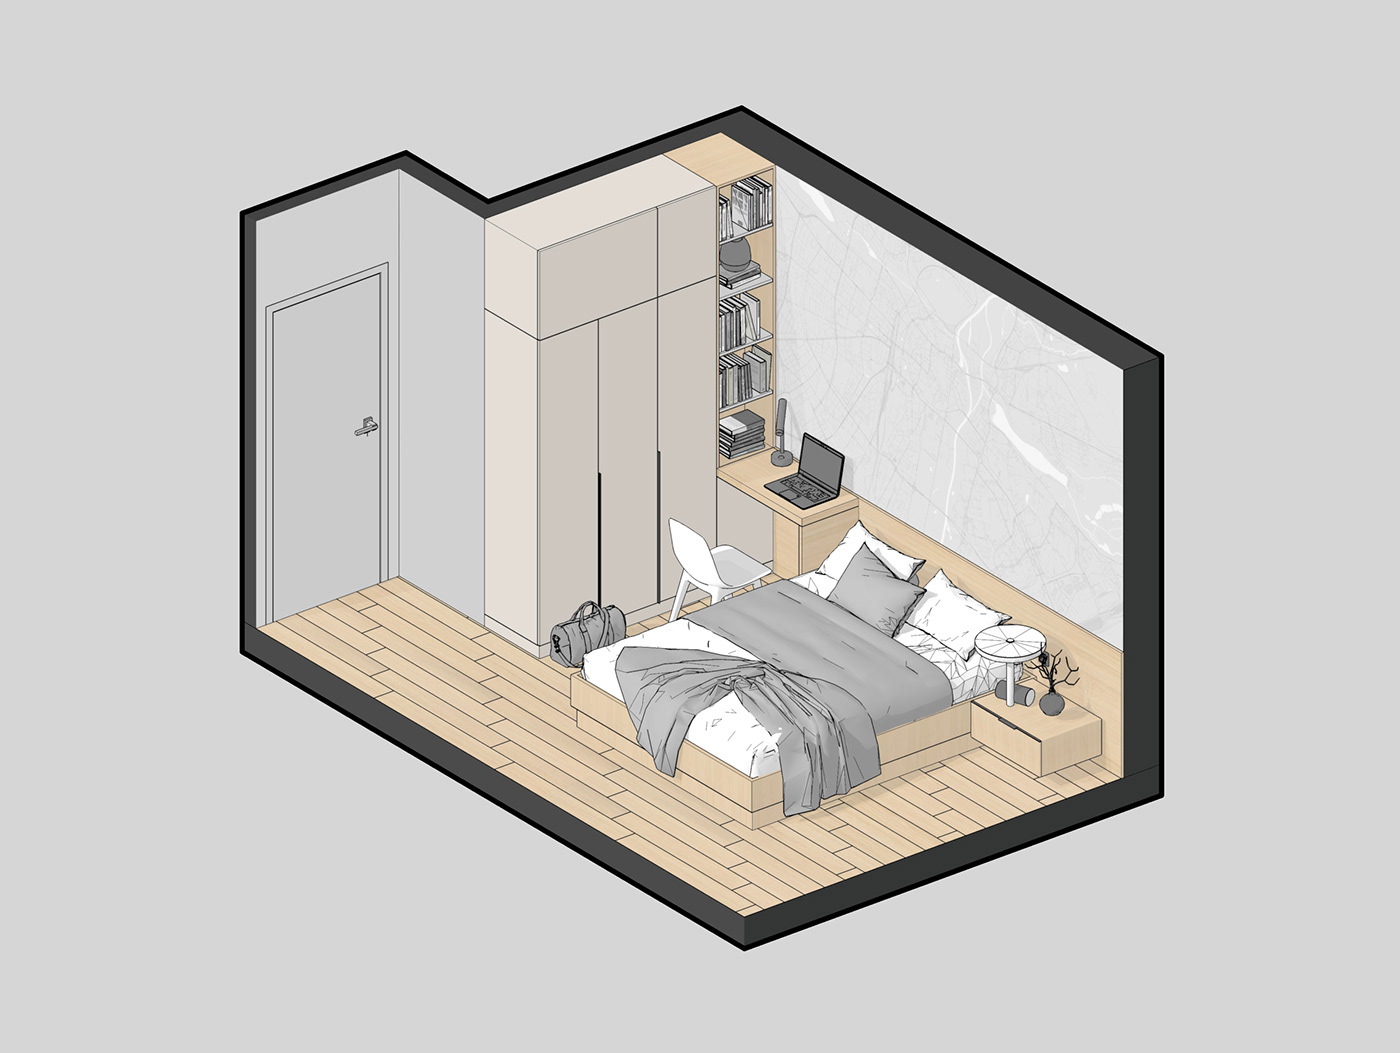 The perspective of the bedroom area.